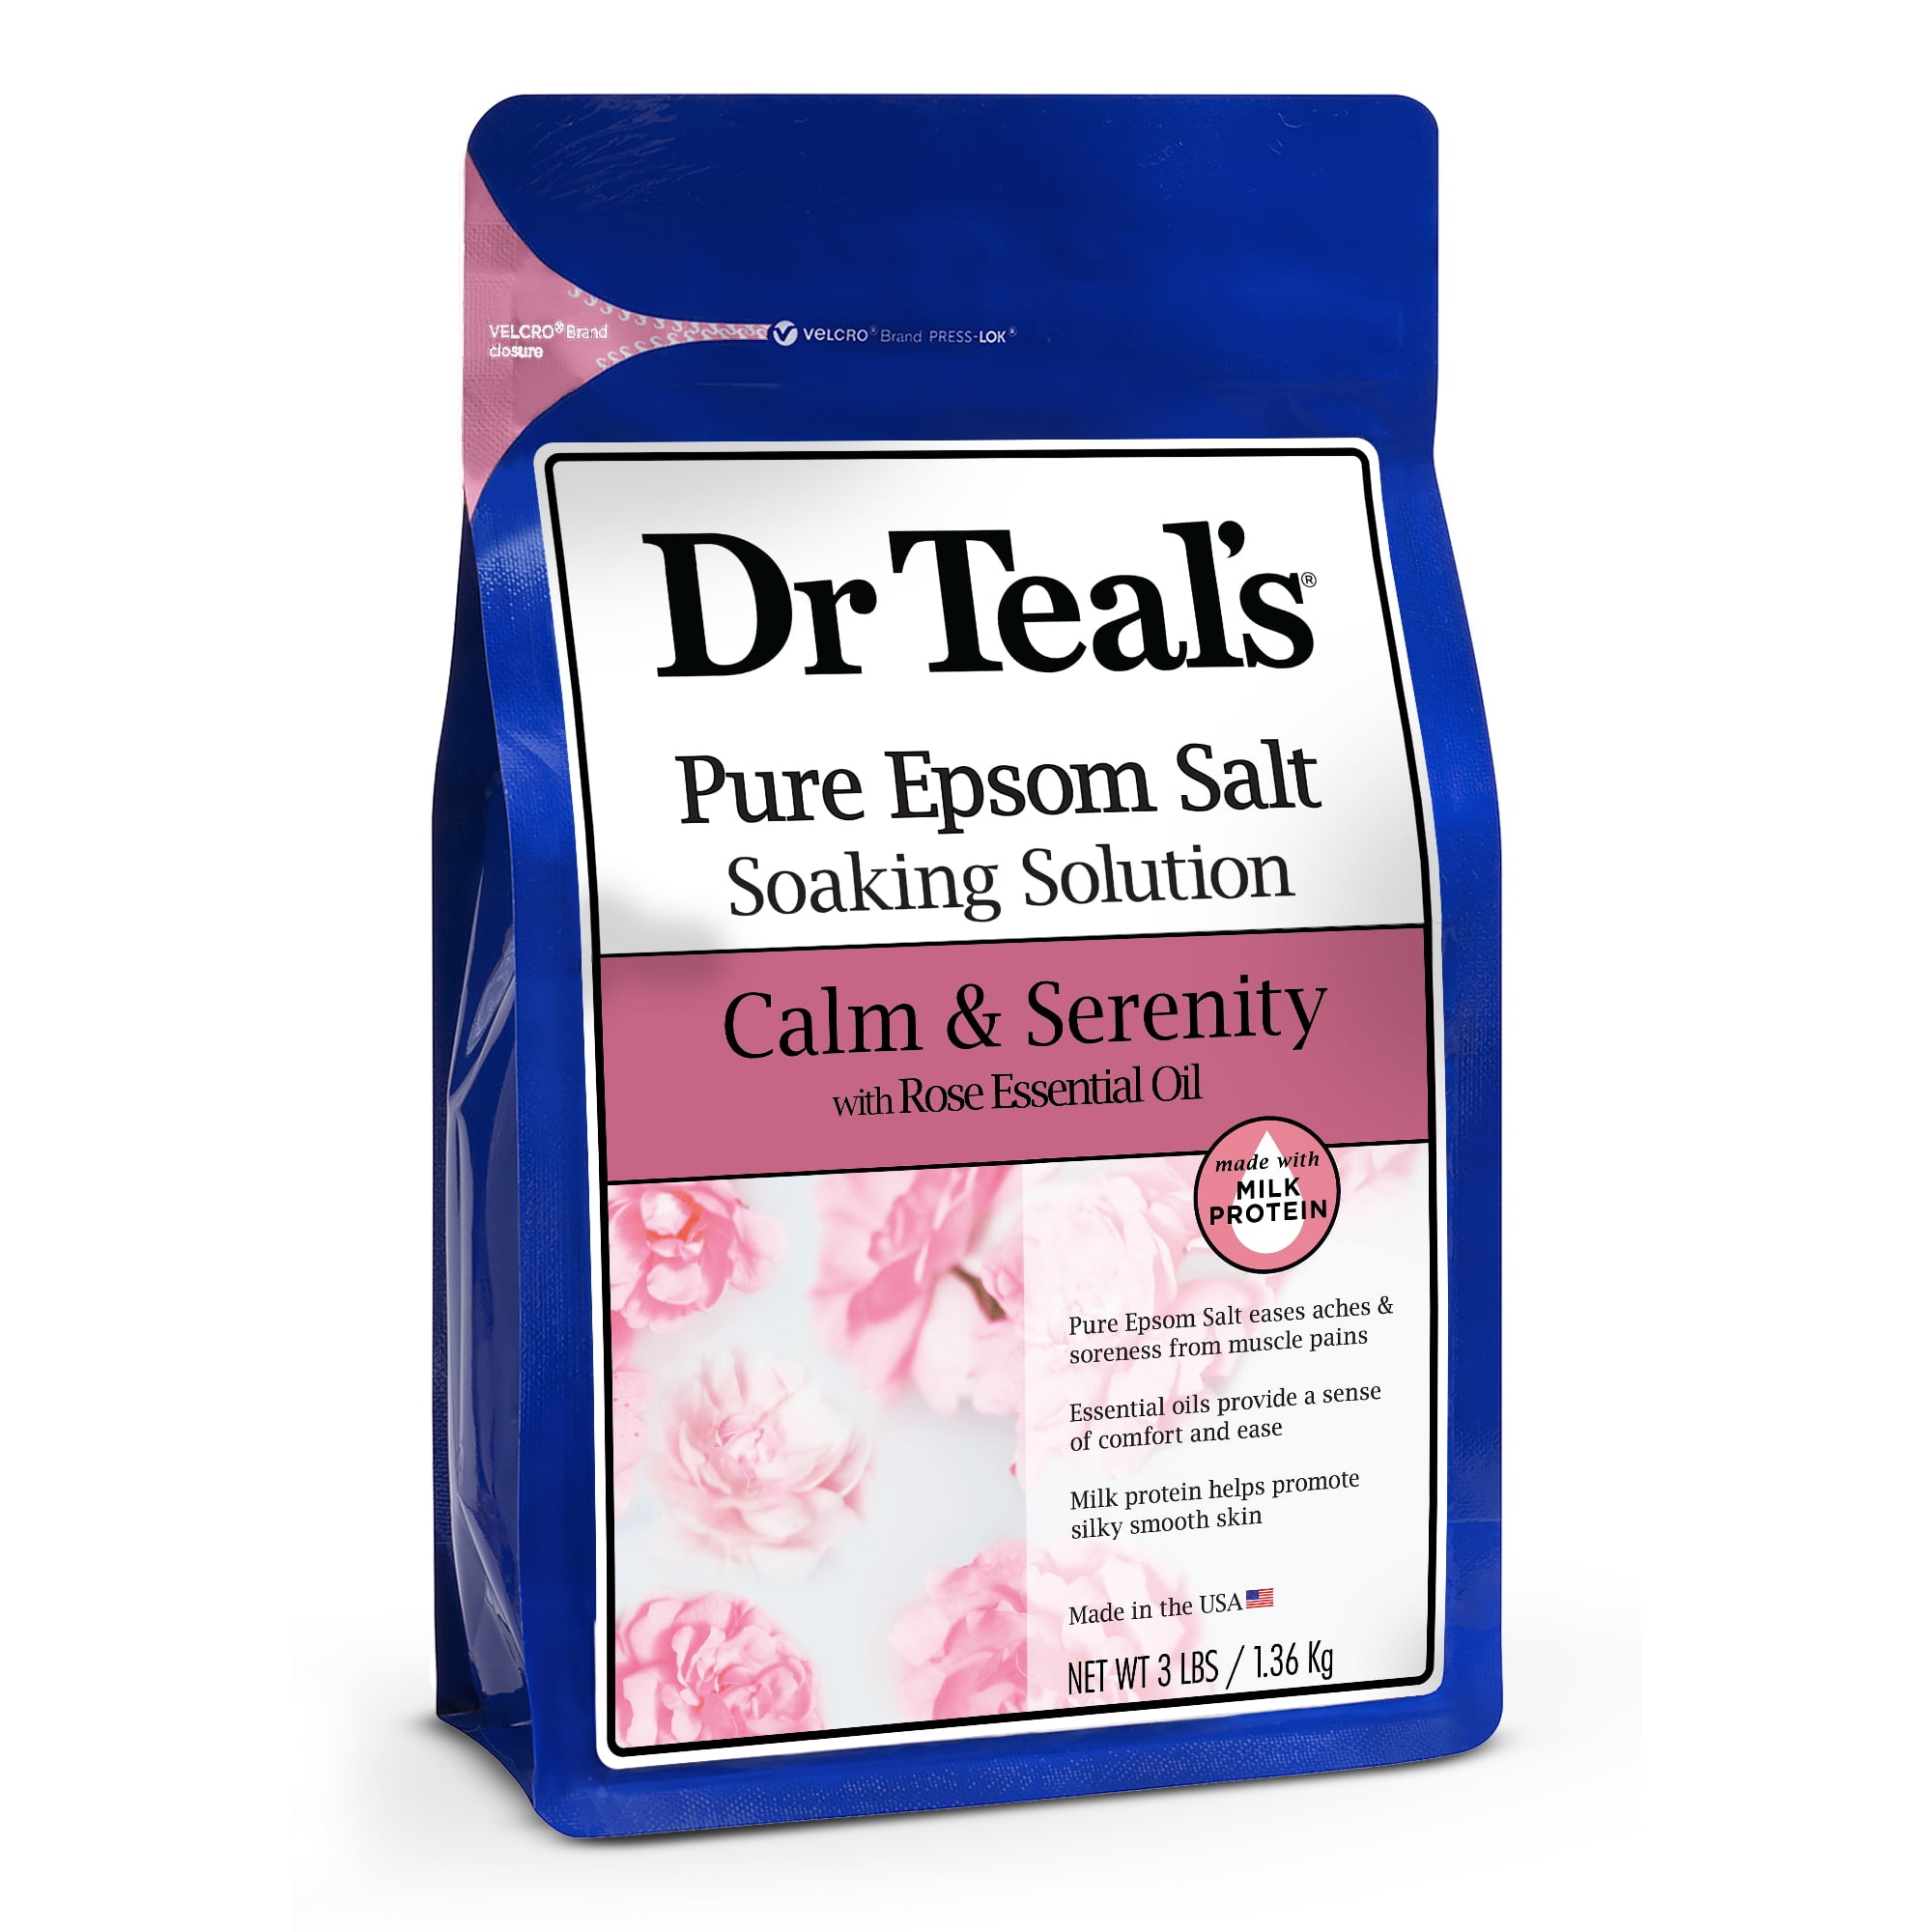 Dr Teal's Pure Epsom Salt Soak, Calm & Serenity with Rose Essential Oil & Milk Protein, 3 lbs